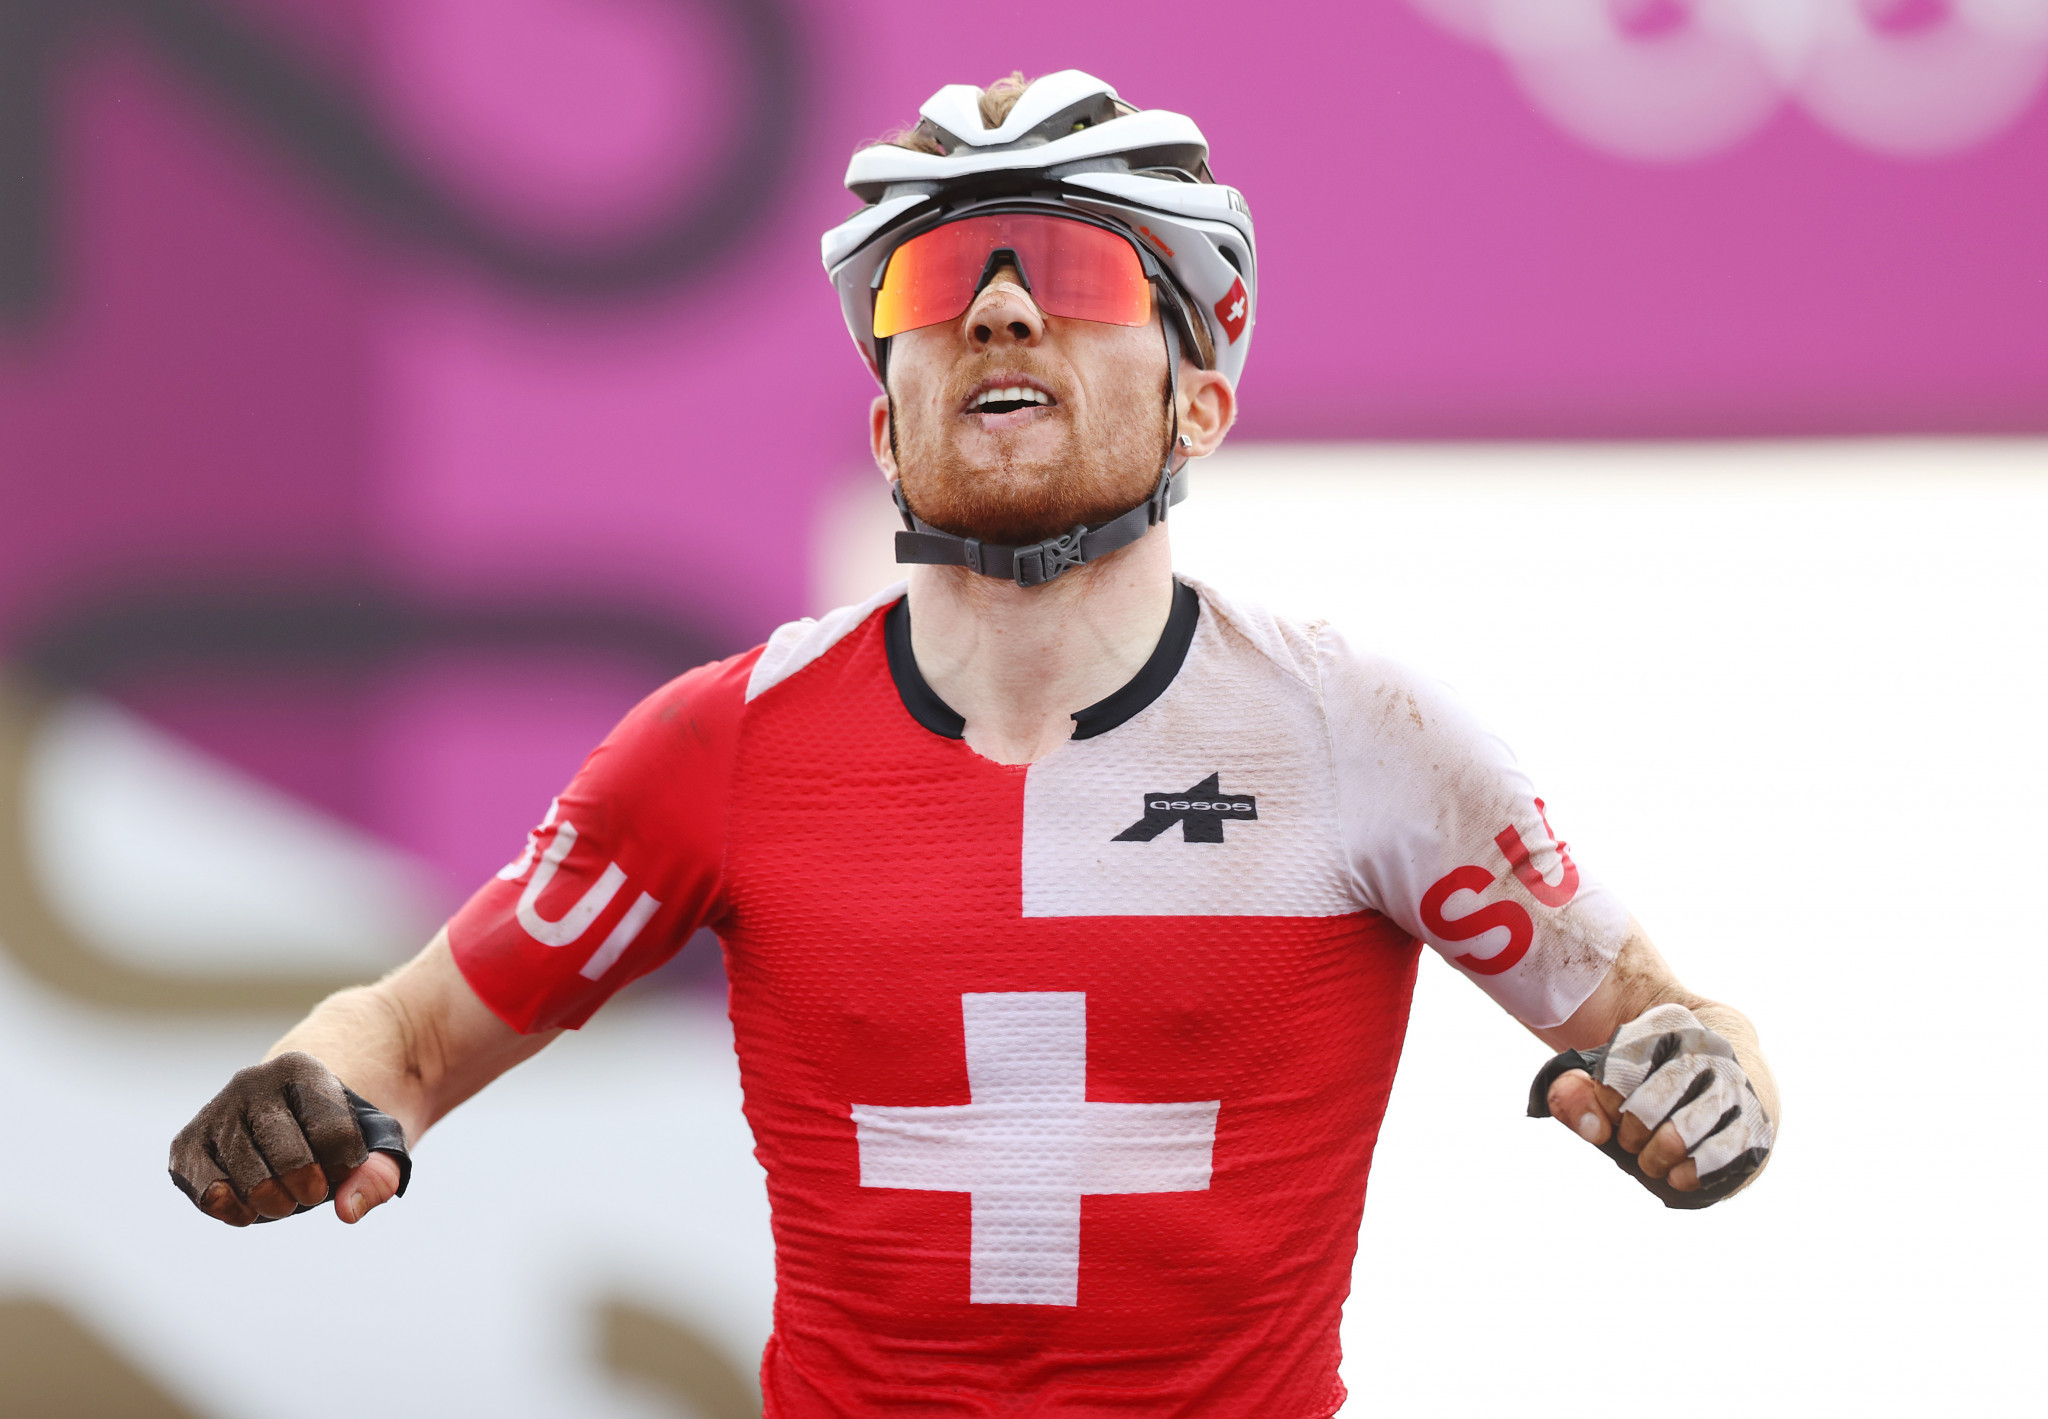 Olympic medallist Flückiger provisionally suspended after failed drugs test